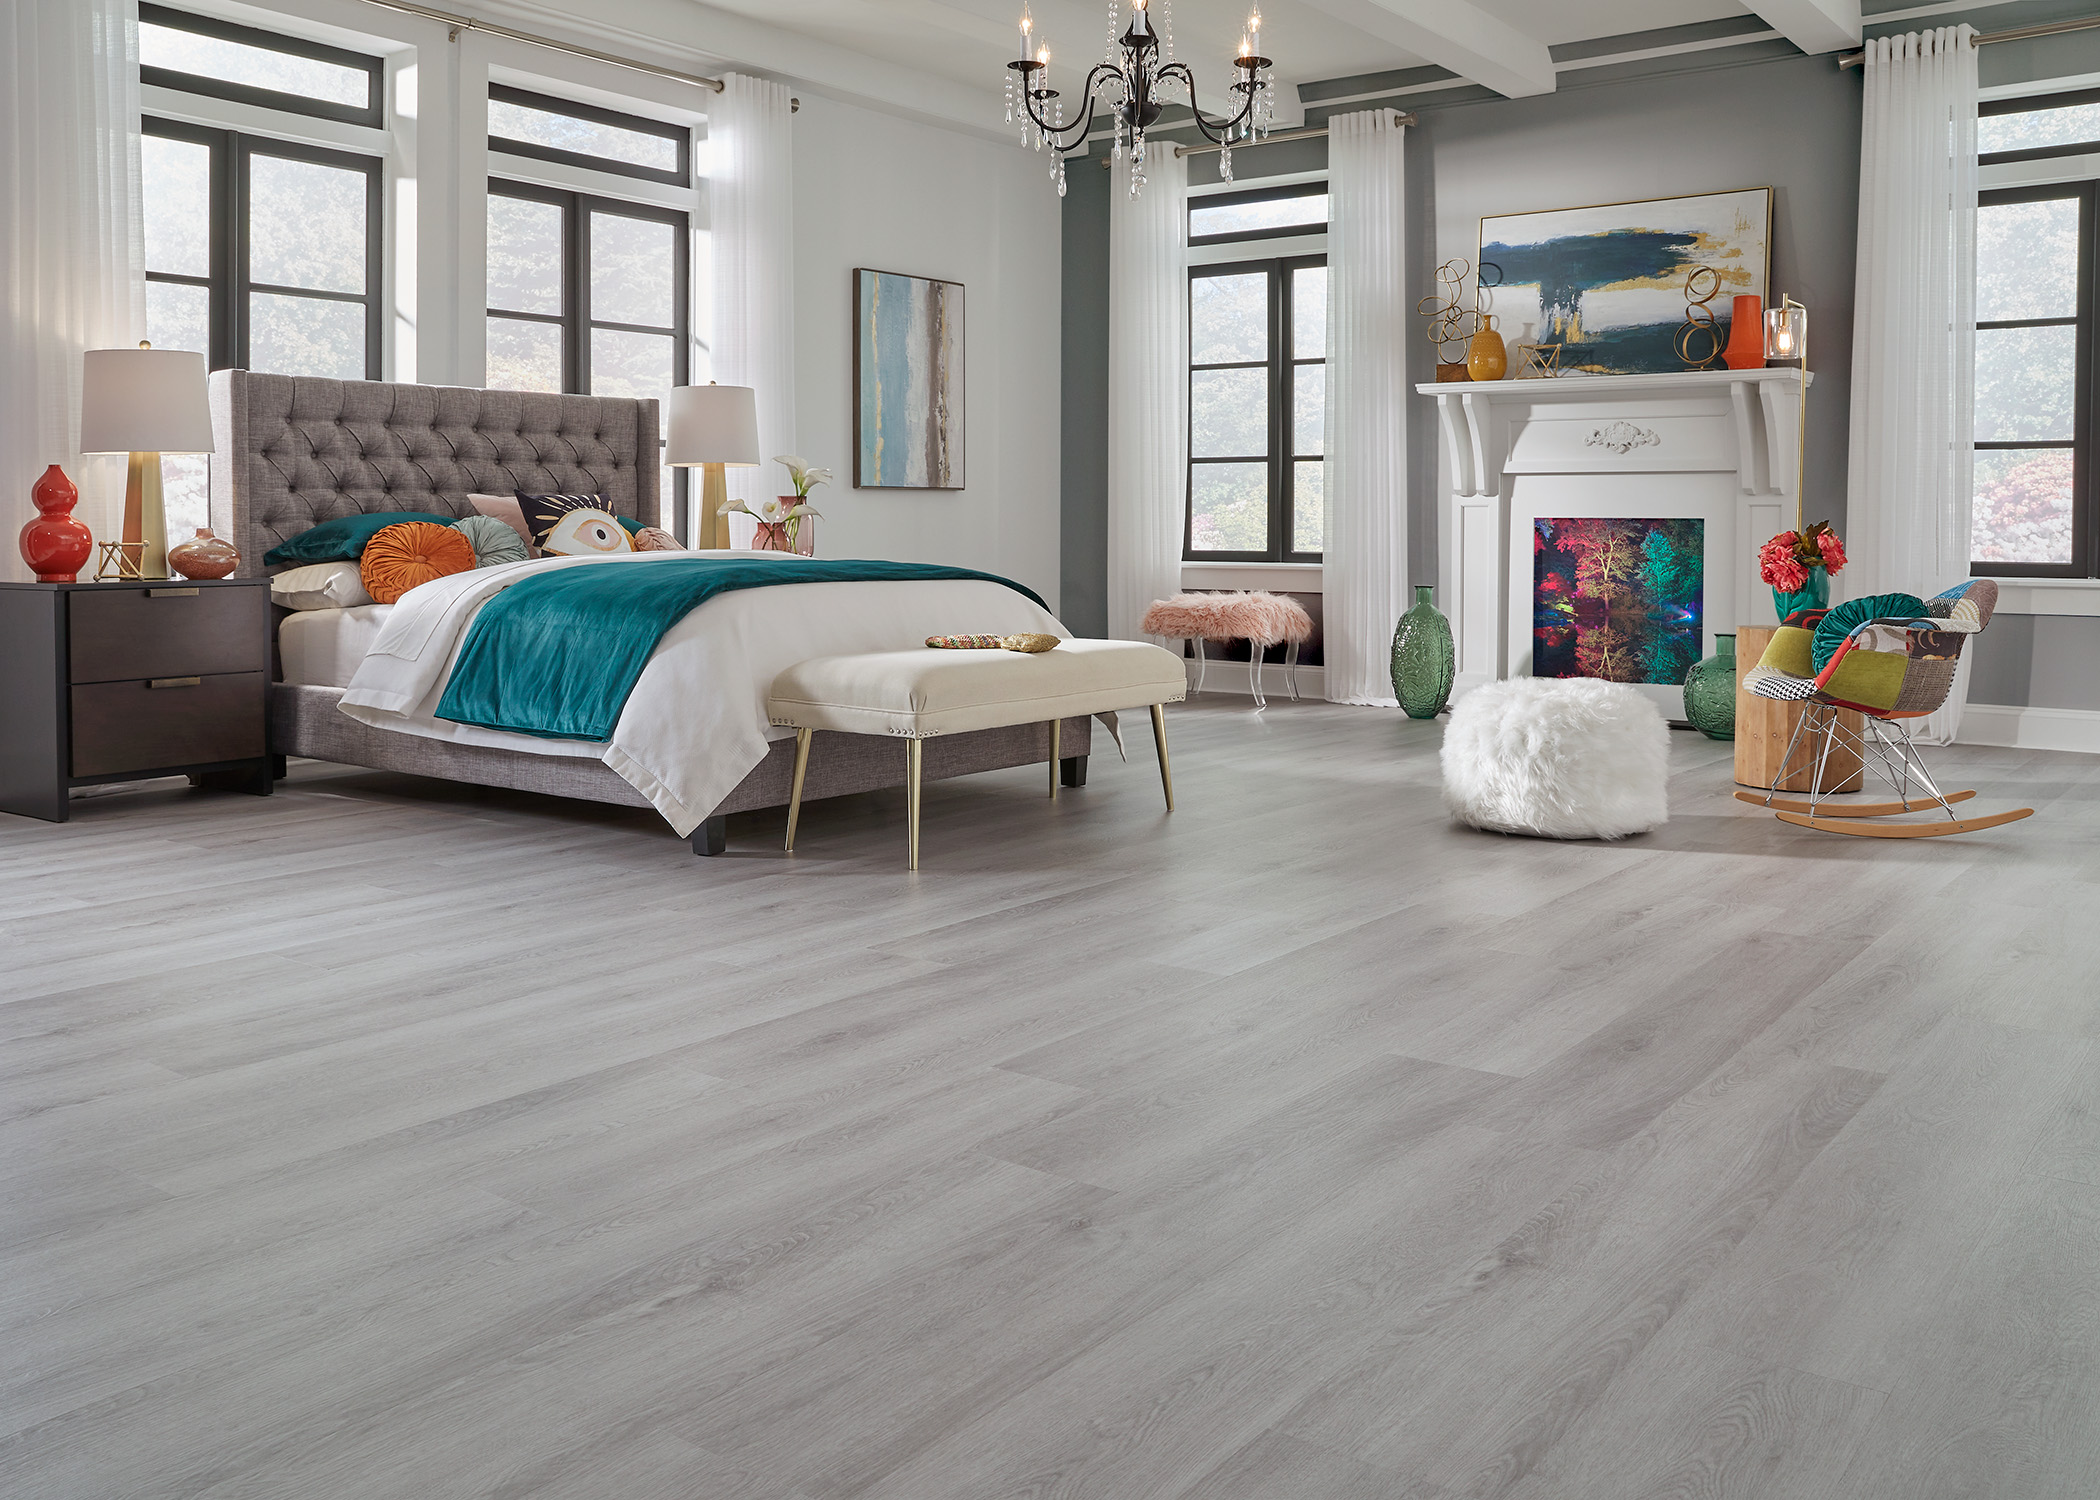 large bedroom with color accents and vinyl plank flooring